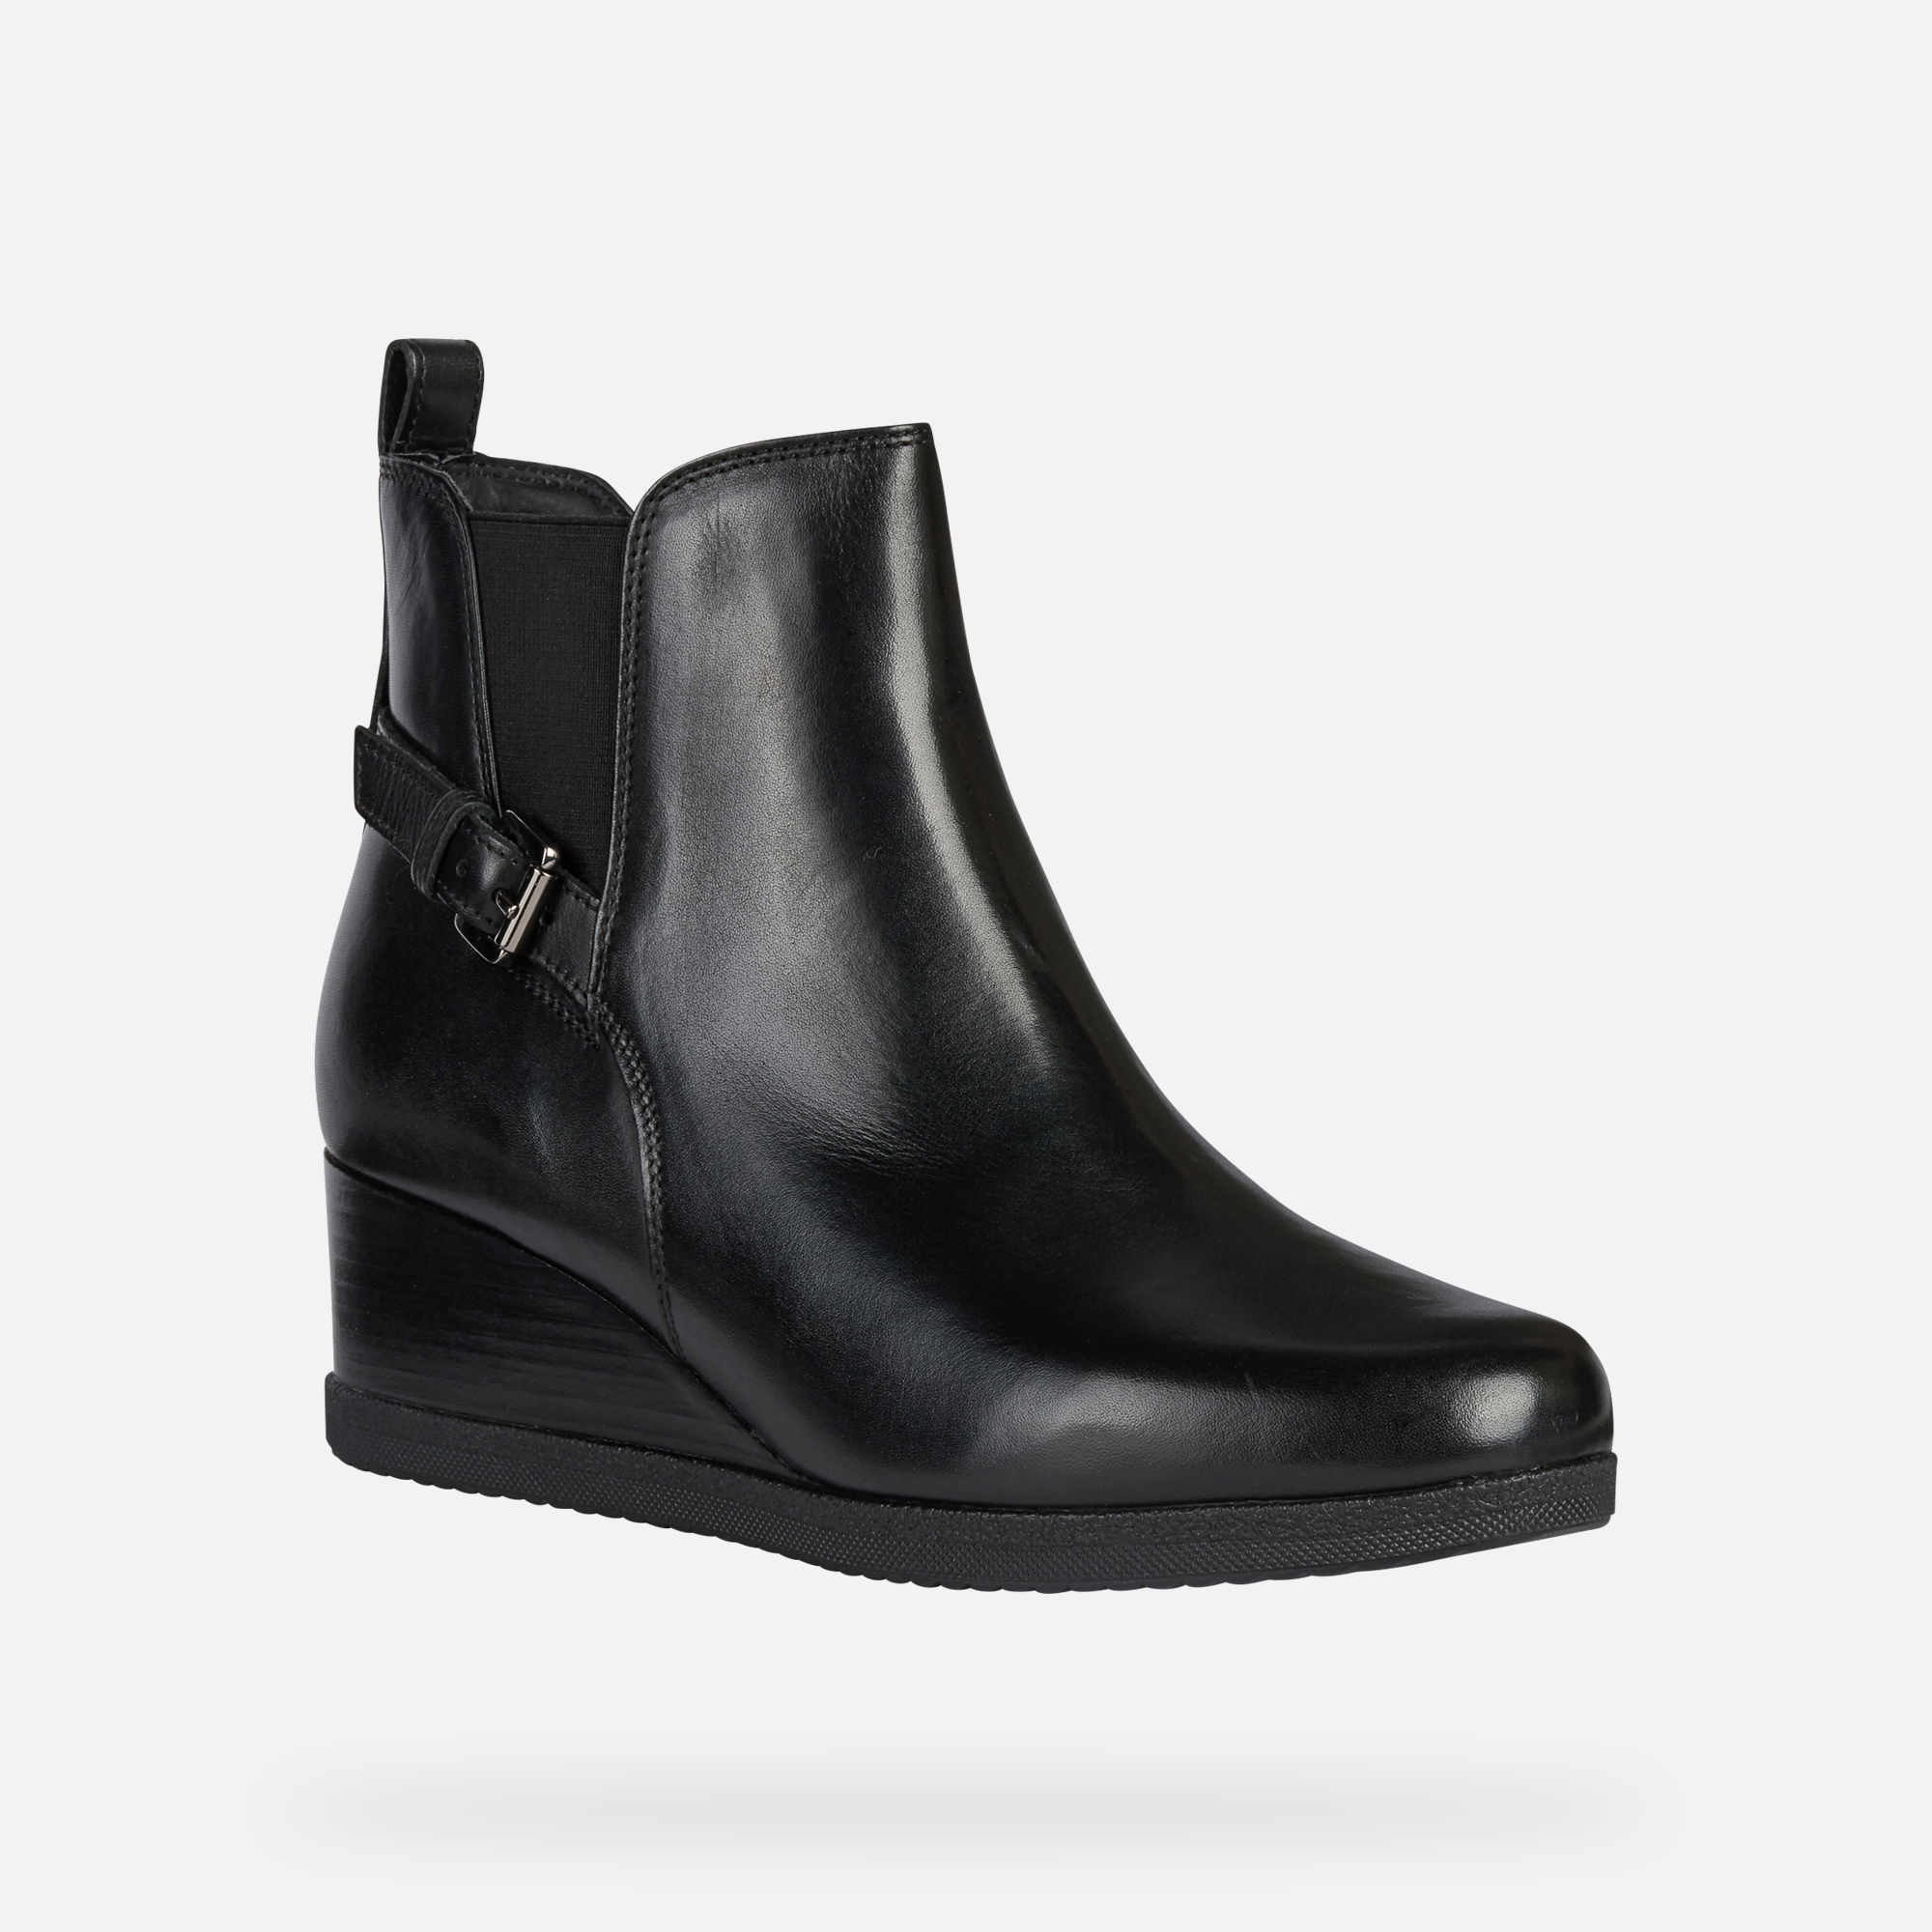 ANYLLA WEDGE WOMAN - ANKLE BOOTS from women | Geox